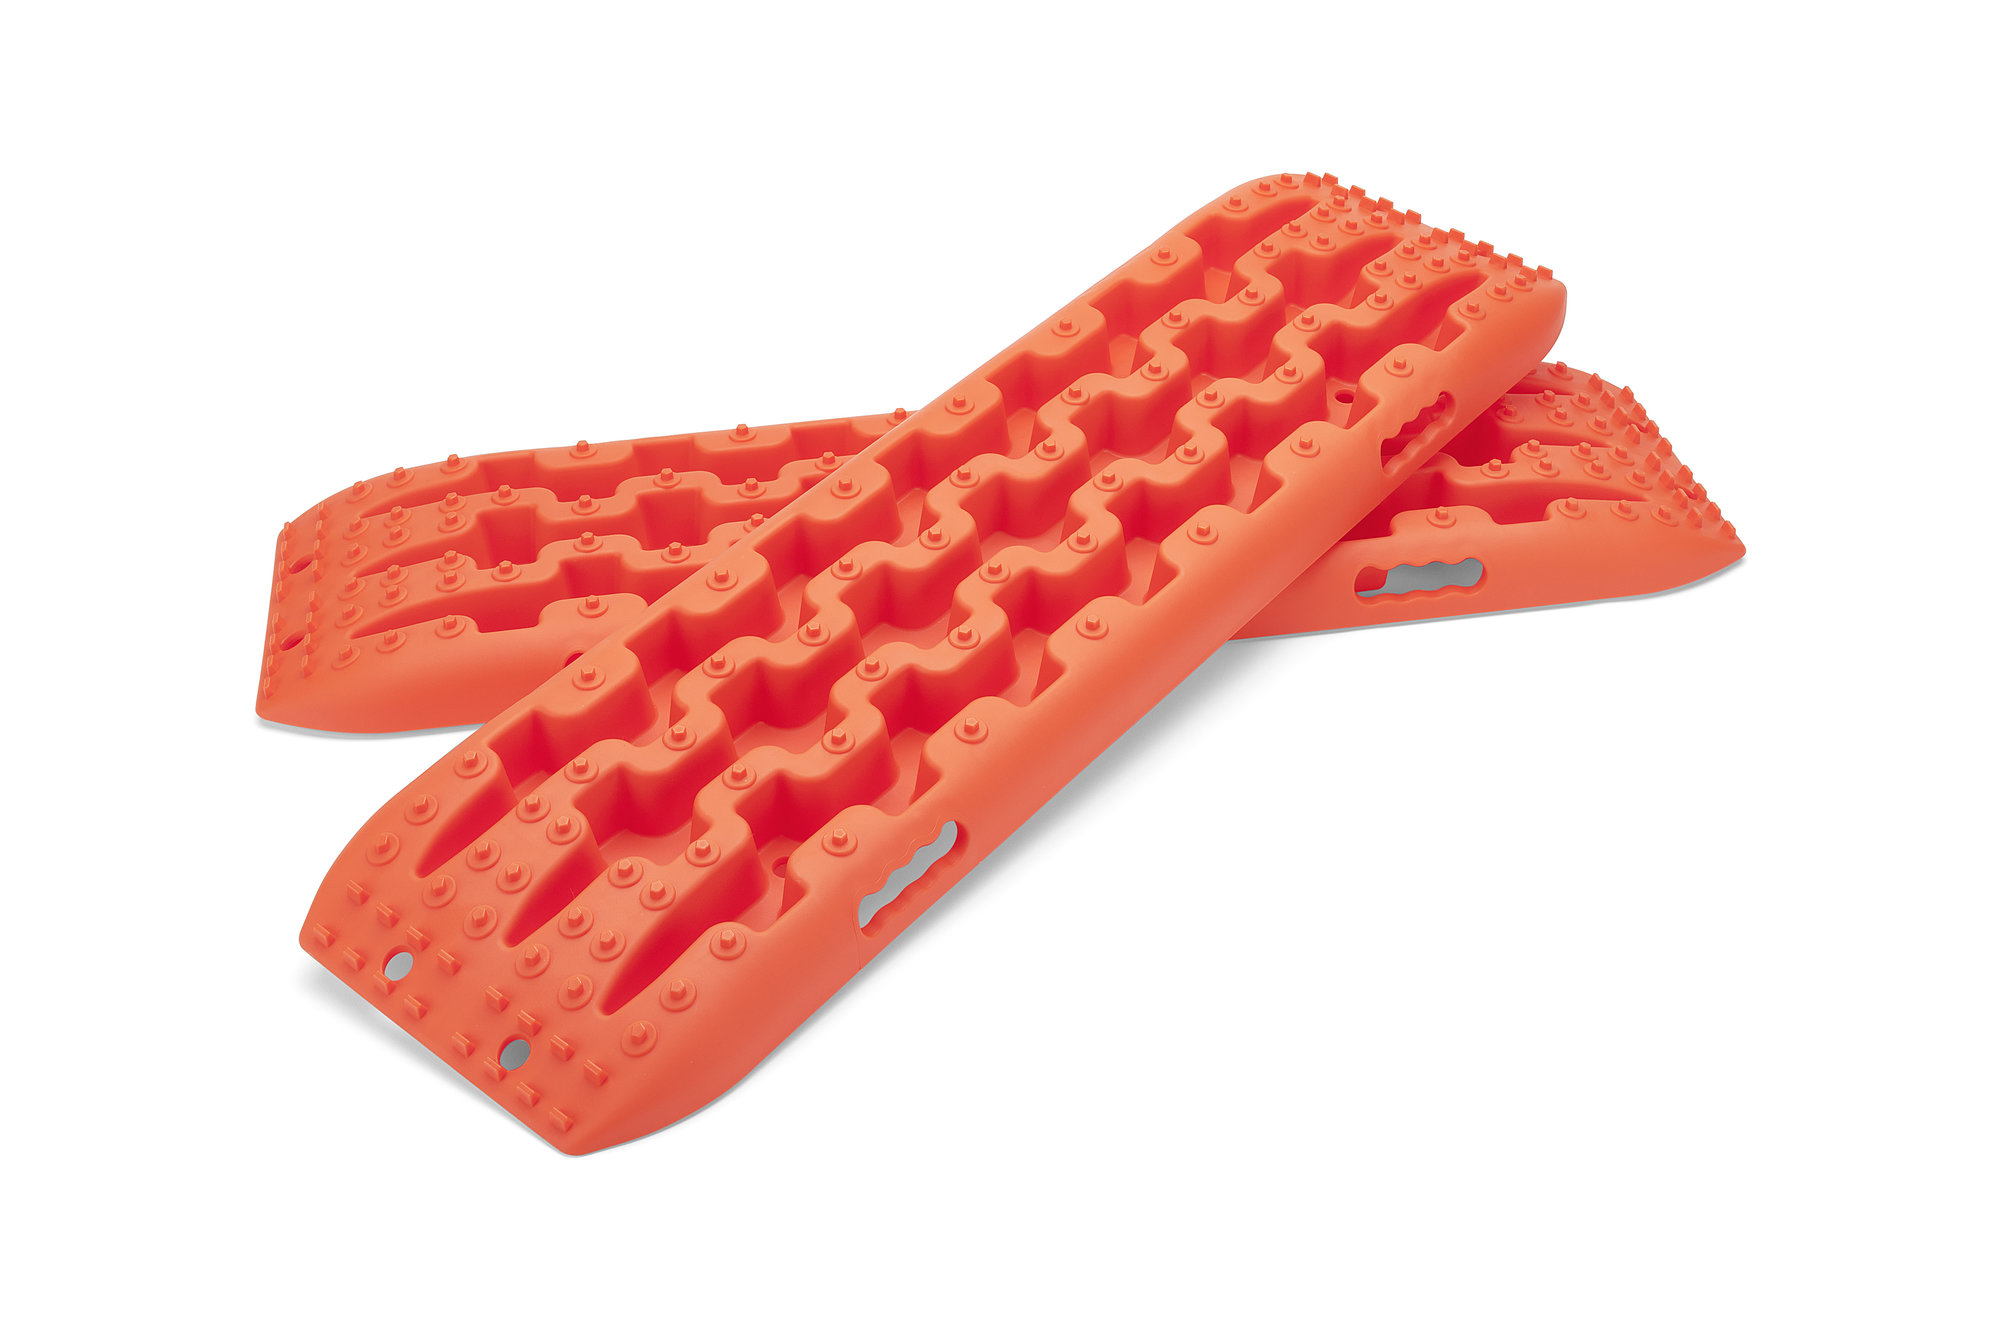 https://www.quadratec.com/sites/default/files/styles/product_zoomed/public/product_images/res-q-42-inch-recovery-board-pair-orange-tabletop%20-%20Copy.jpg